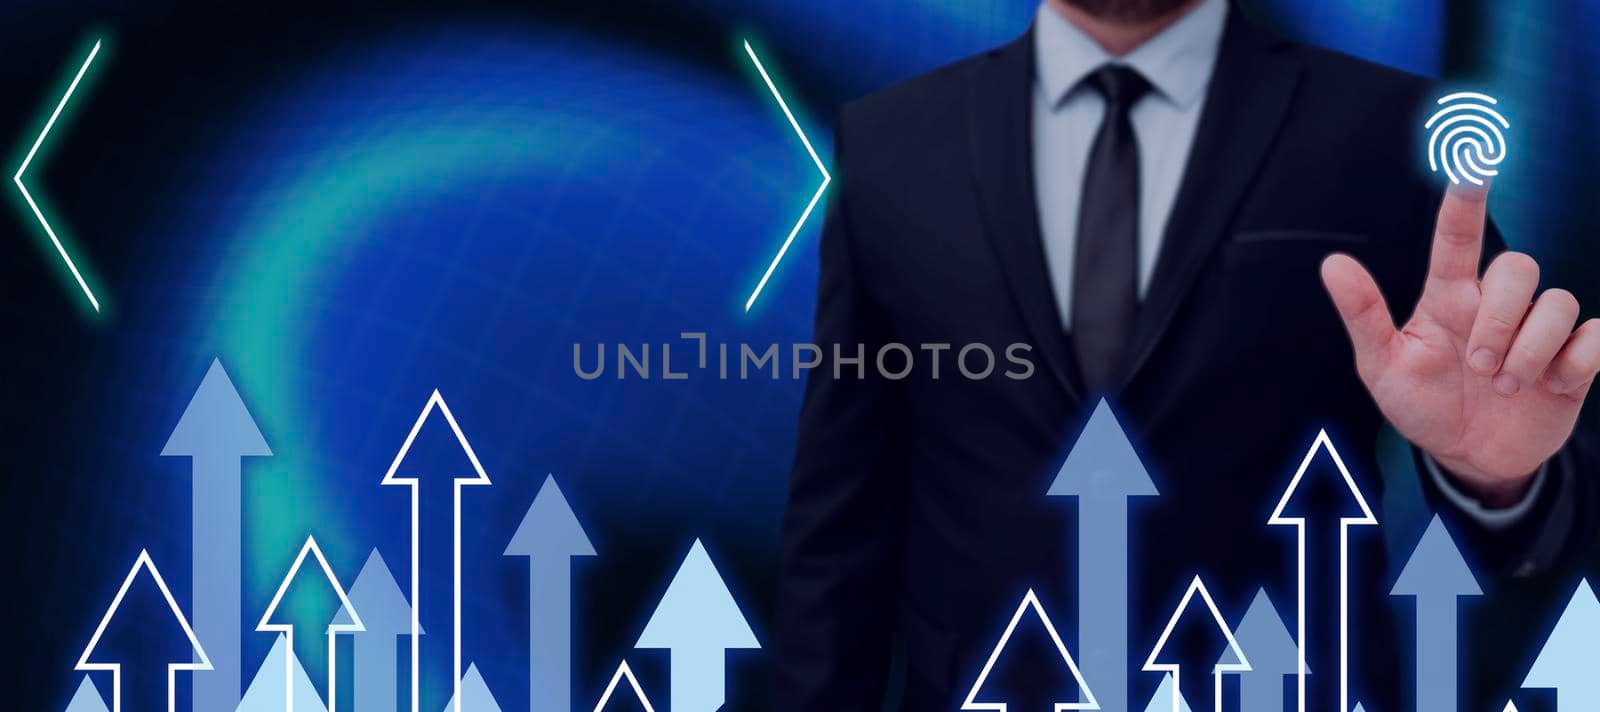 Businessman Pointing On Fingerprint Symbol In A Futuristic Design With Arrows Going Up. Man Pressing On Touch Screen And Presenting Important Information In A Meeting. by nialowwa